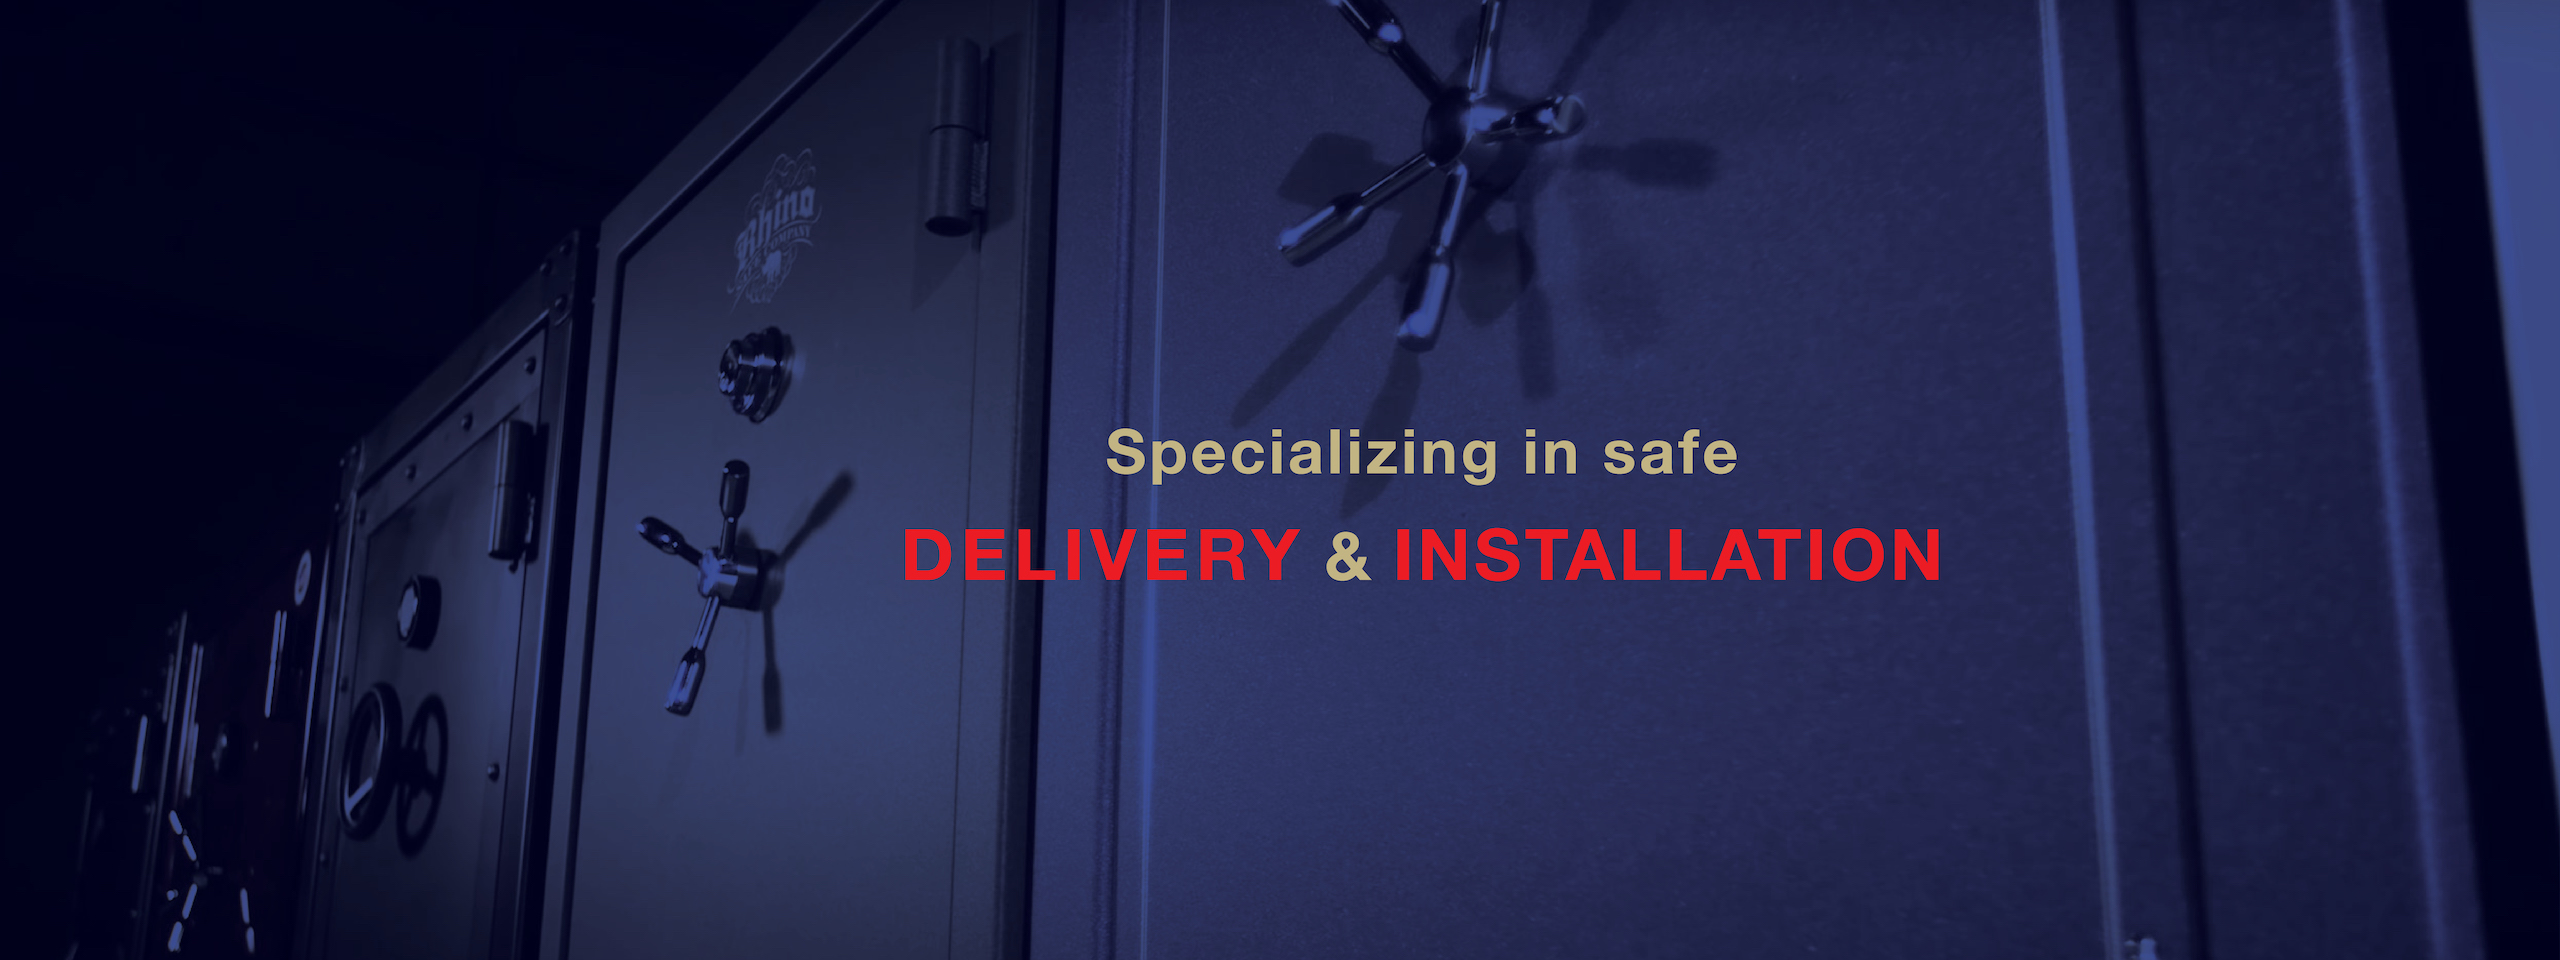 Safe Delivery and Installation Services Texas Safe and Vaults Austin Texas